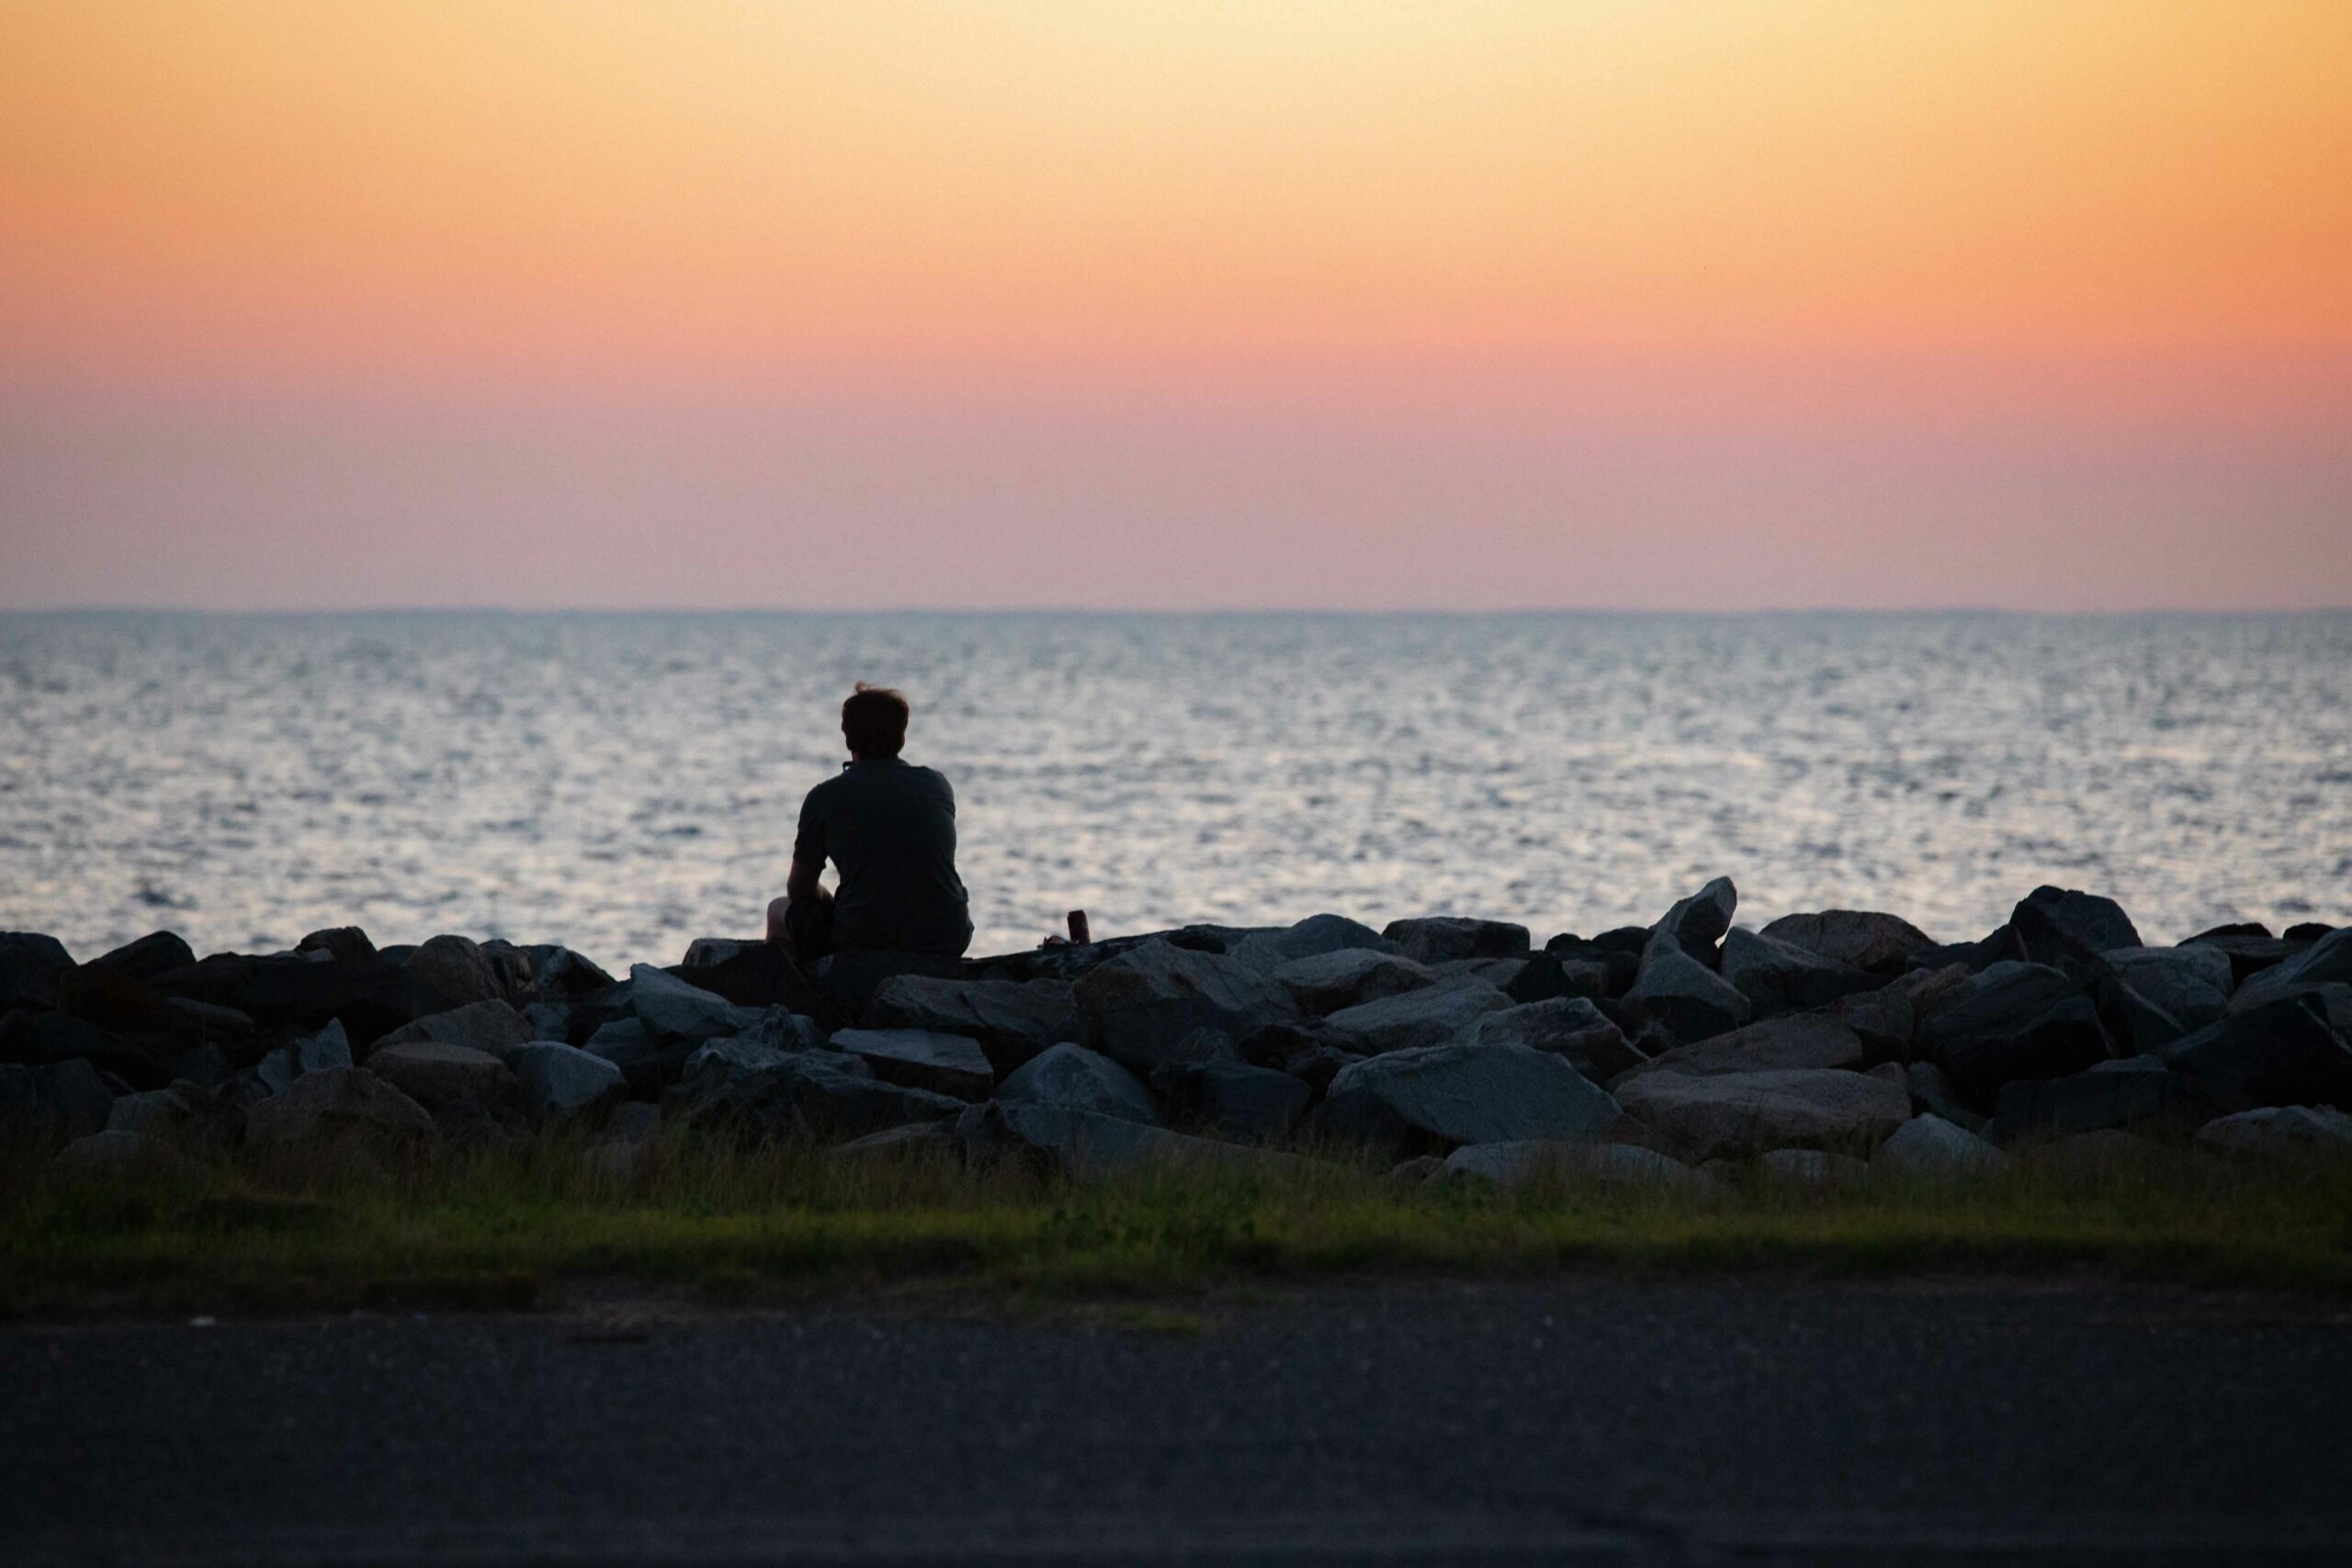 Man sitting on the west side jetty watching sunset | VPM COM